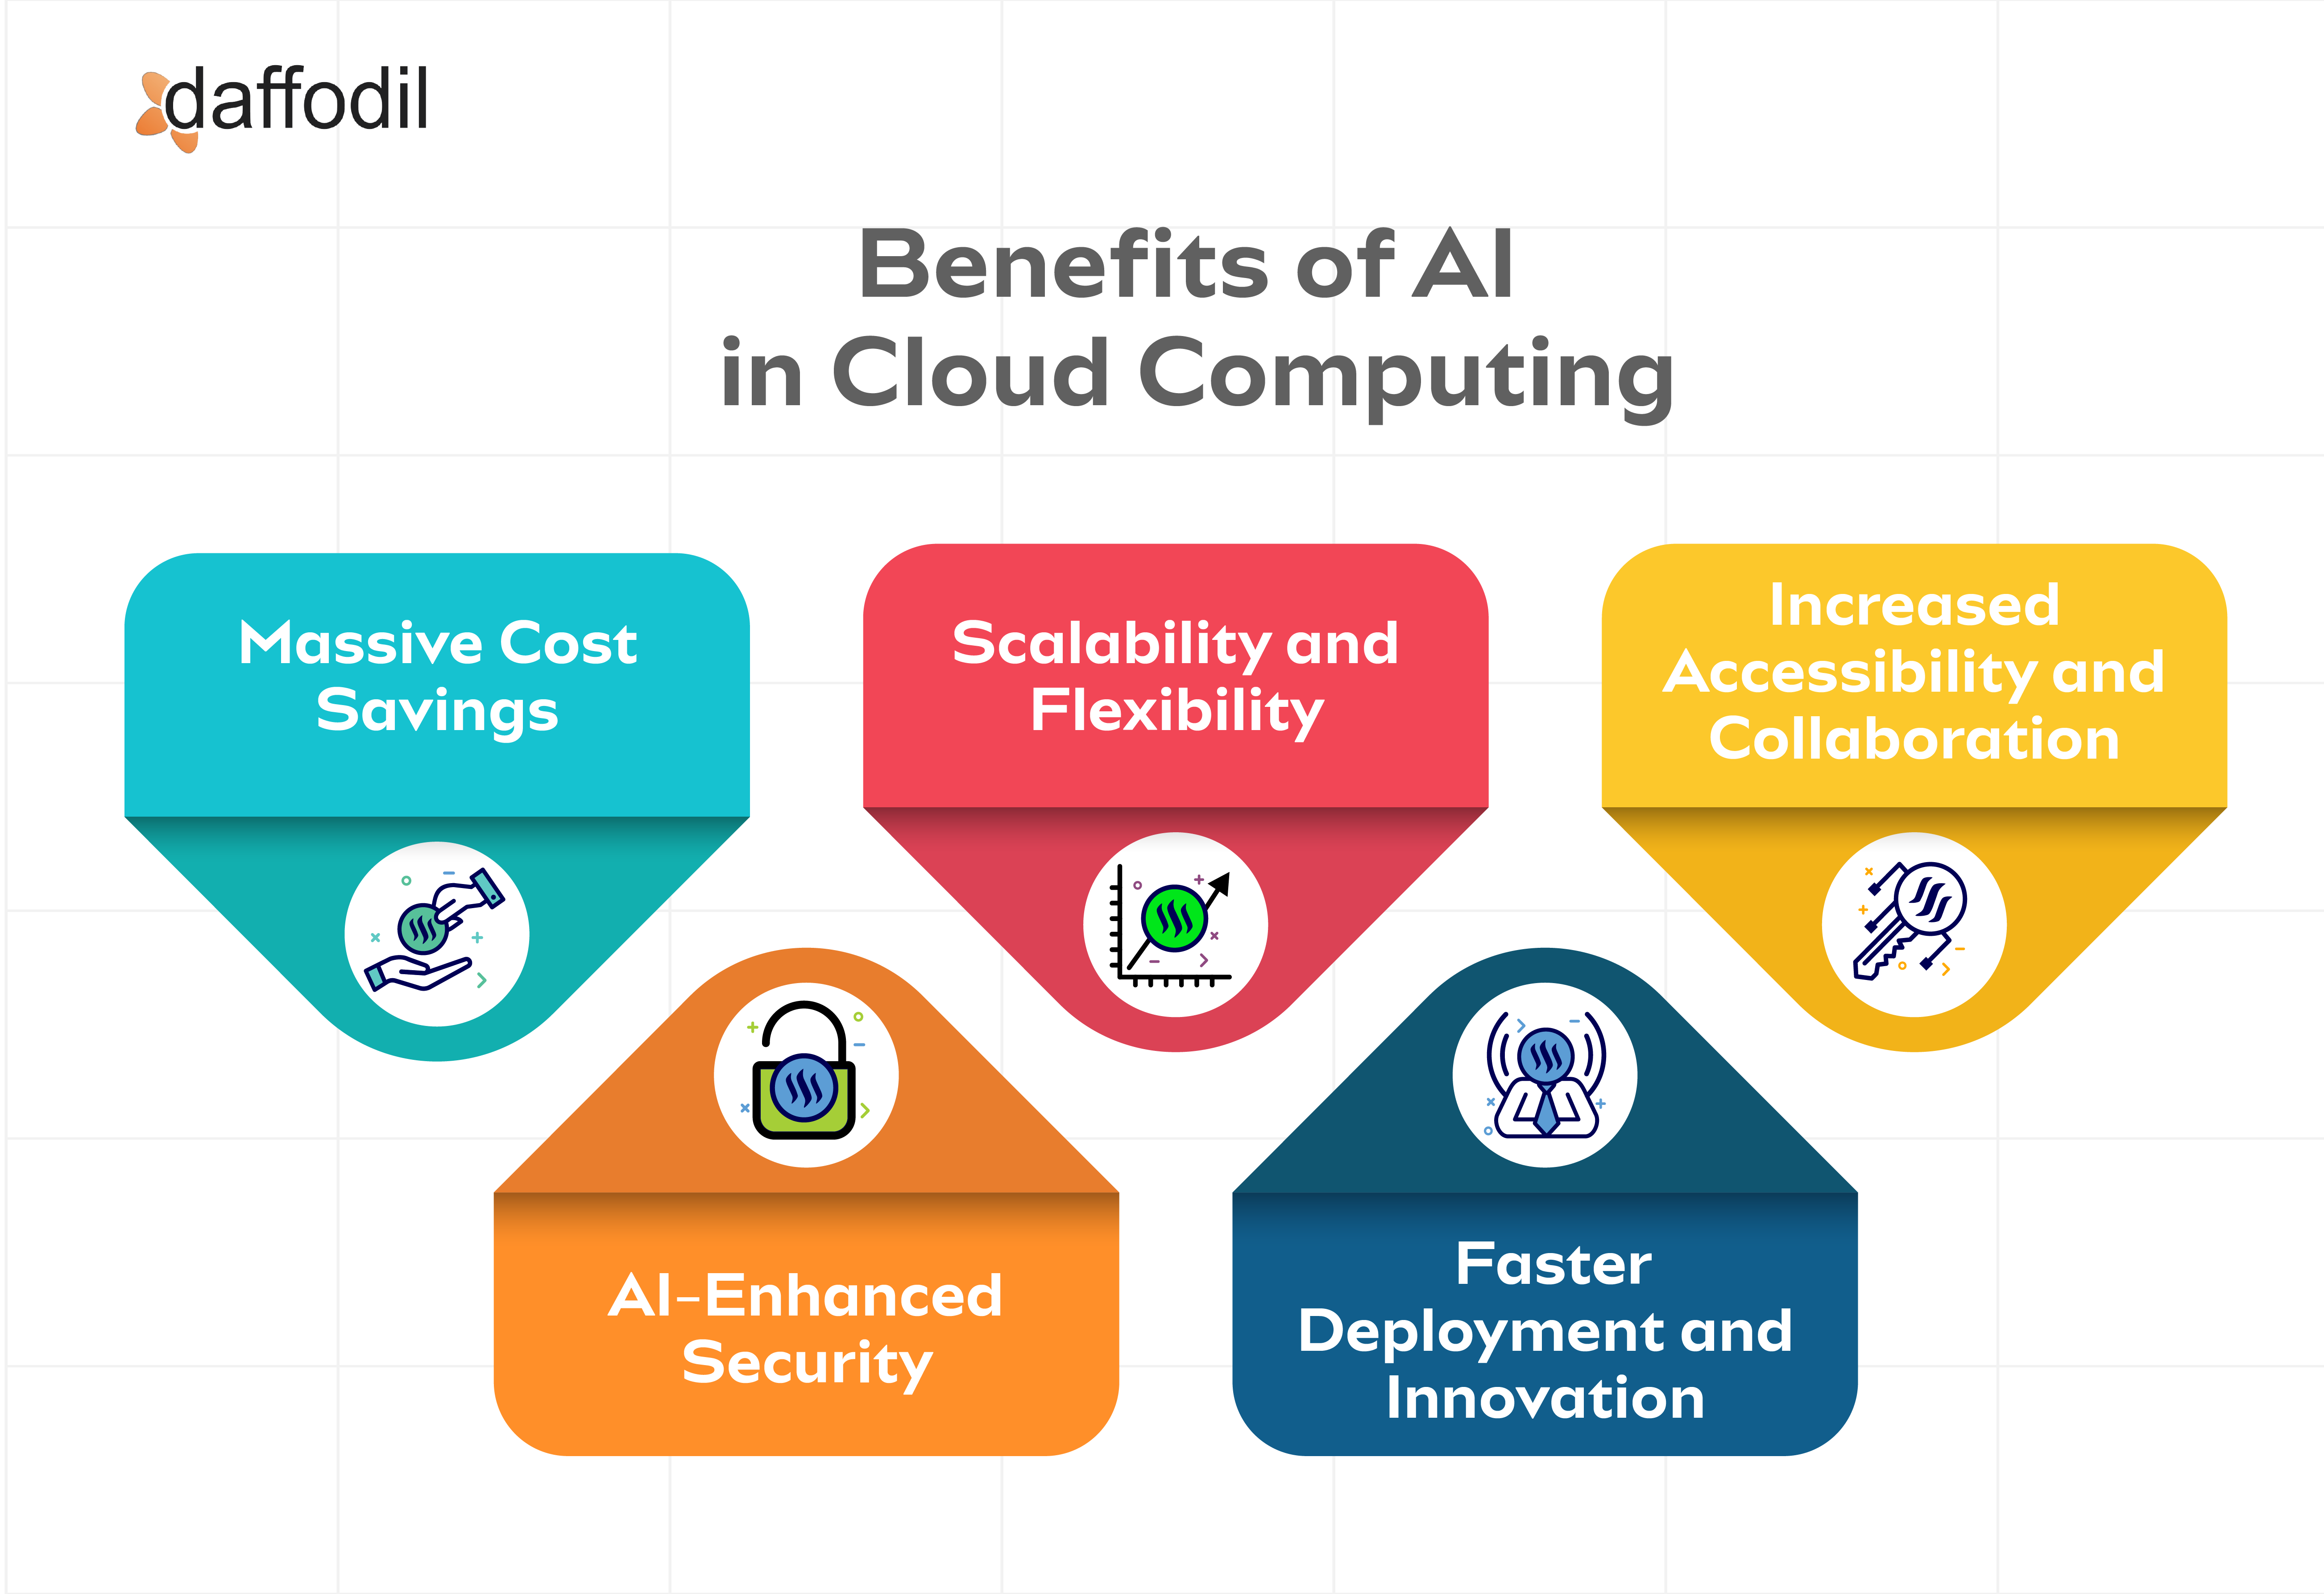 Benefits of AI in Cloud Computing